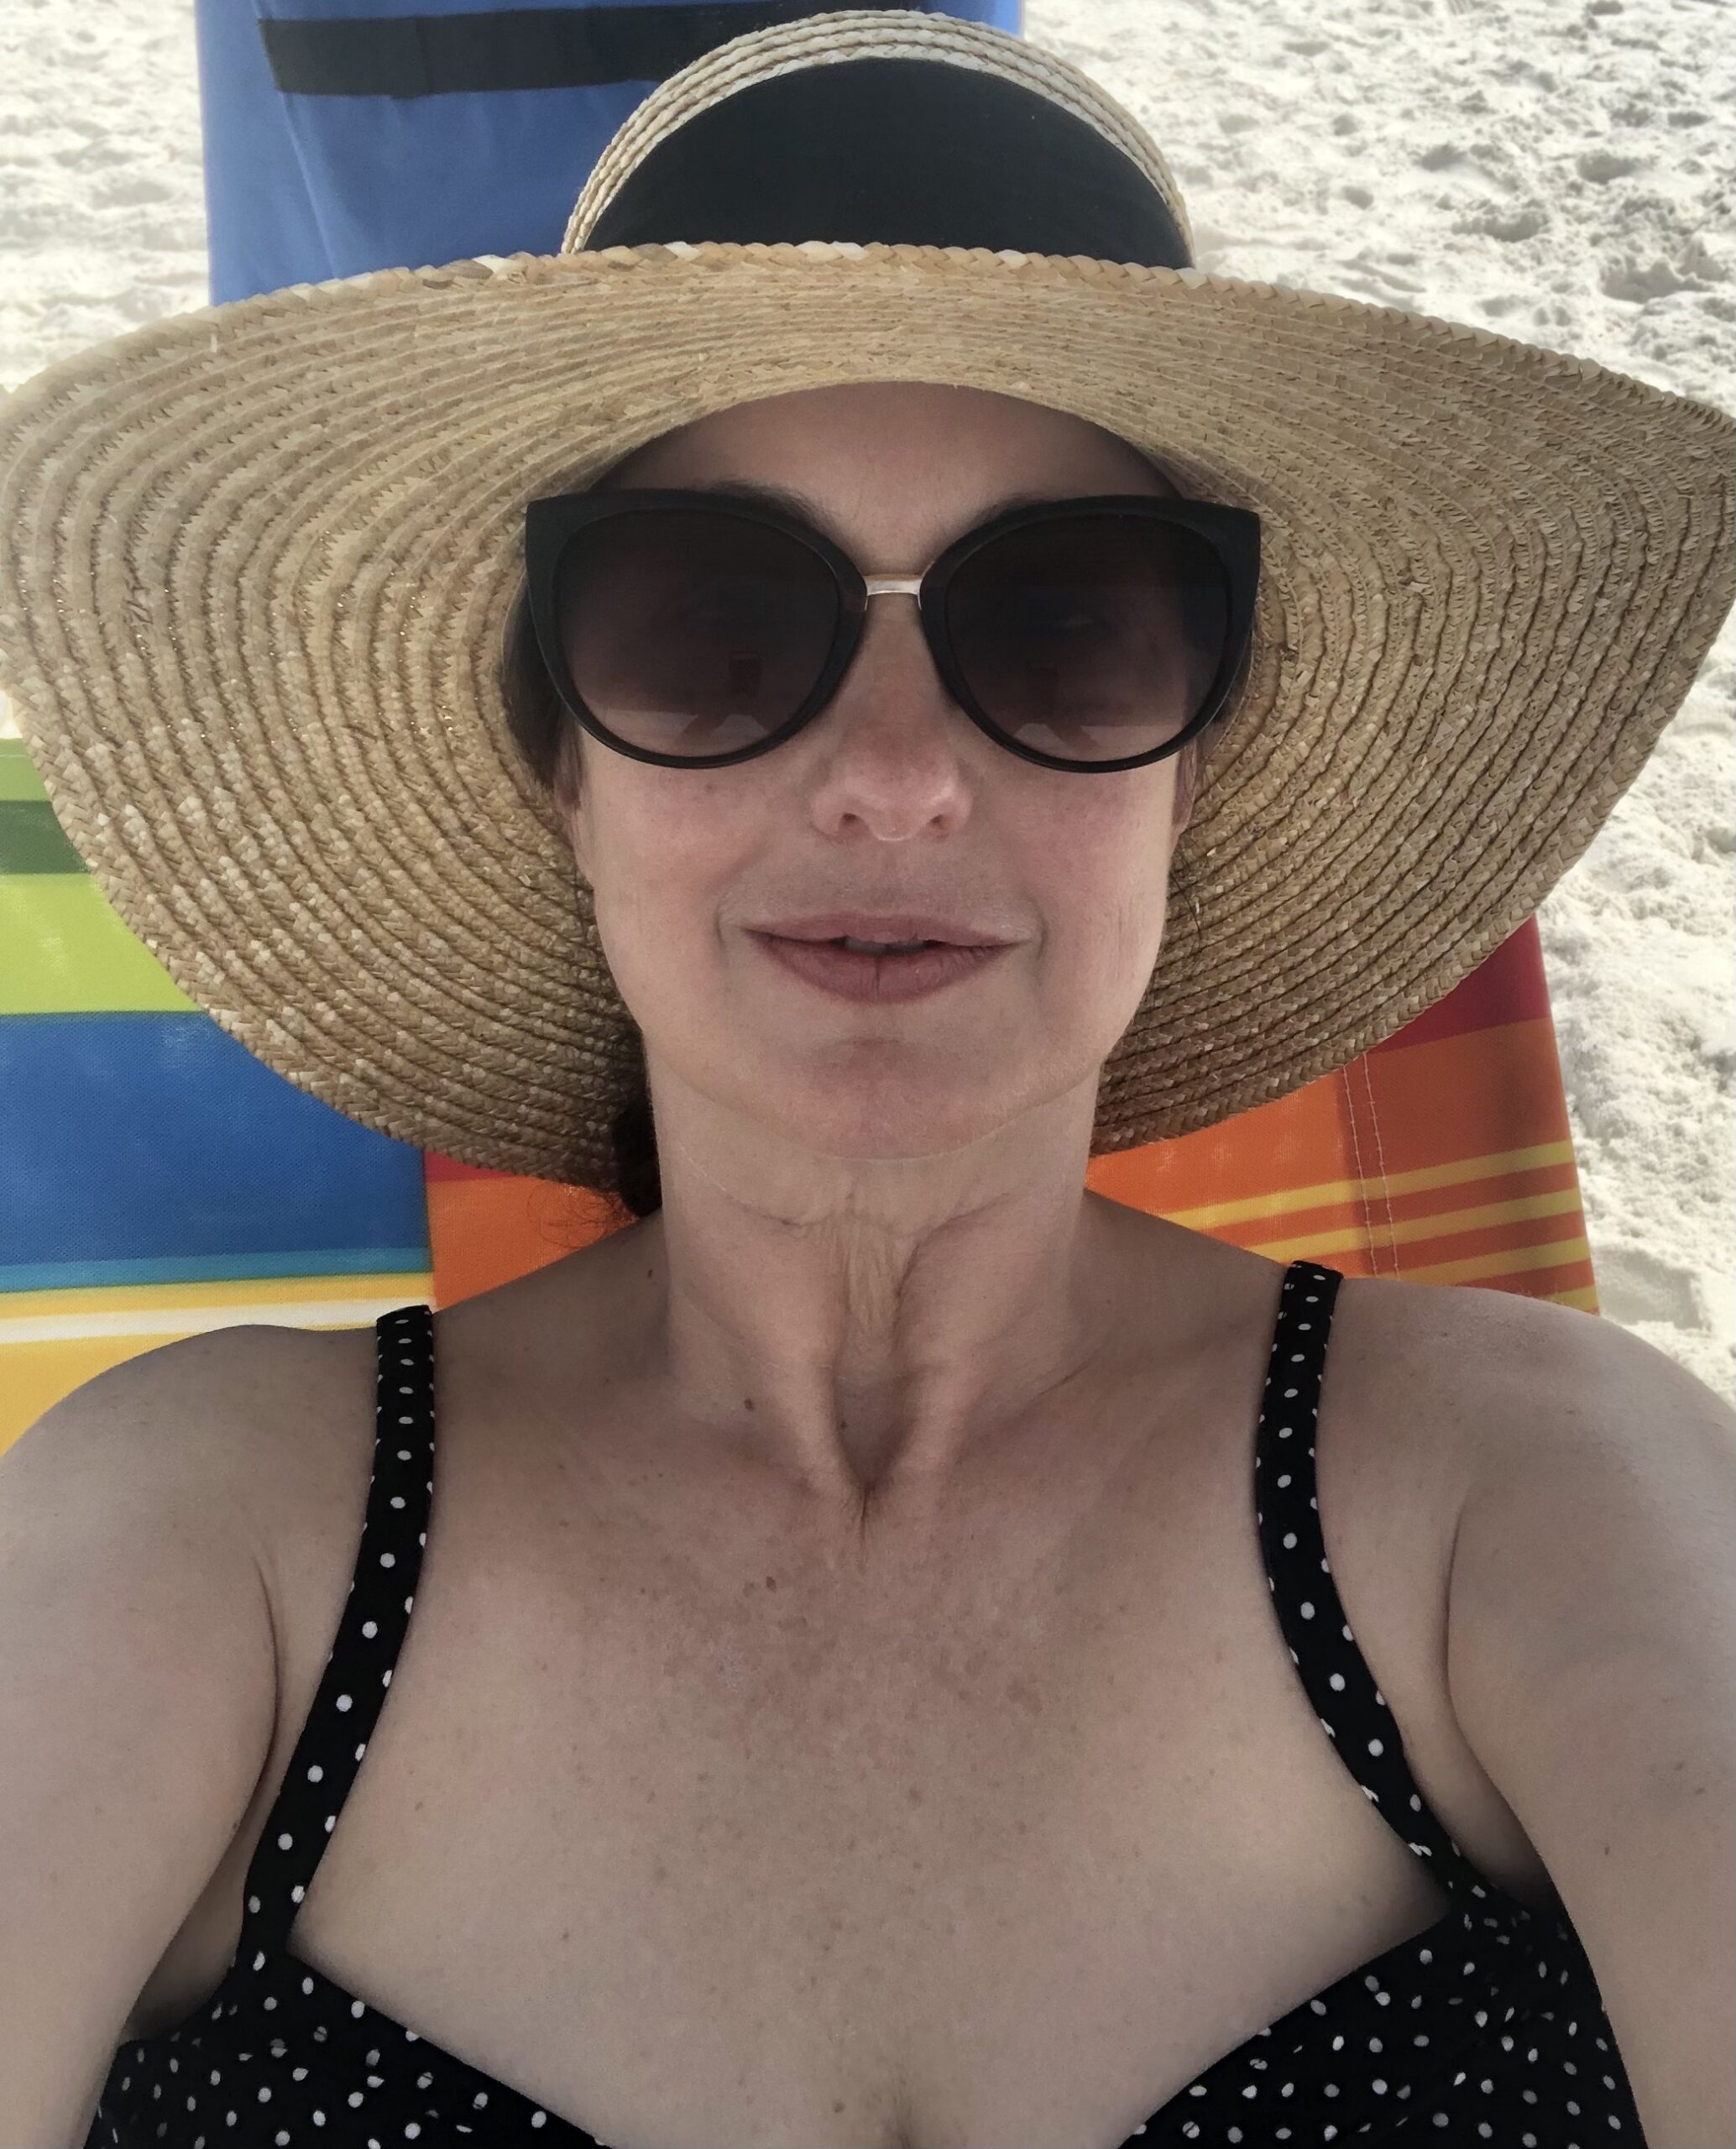 Women on a sandy beach wearing sunglasses and hat